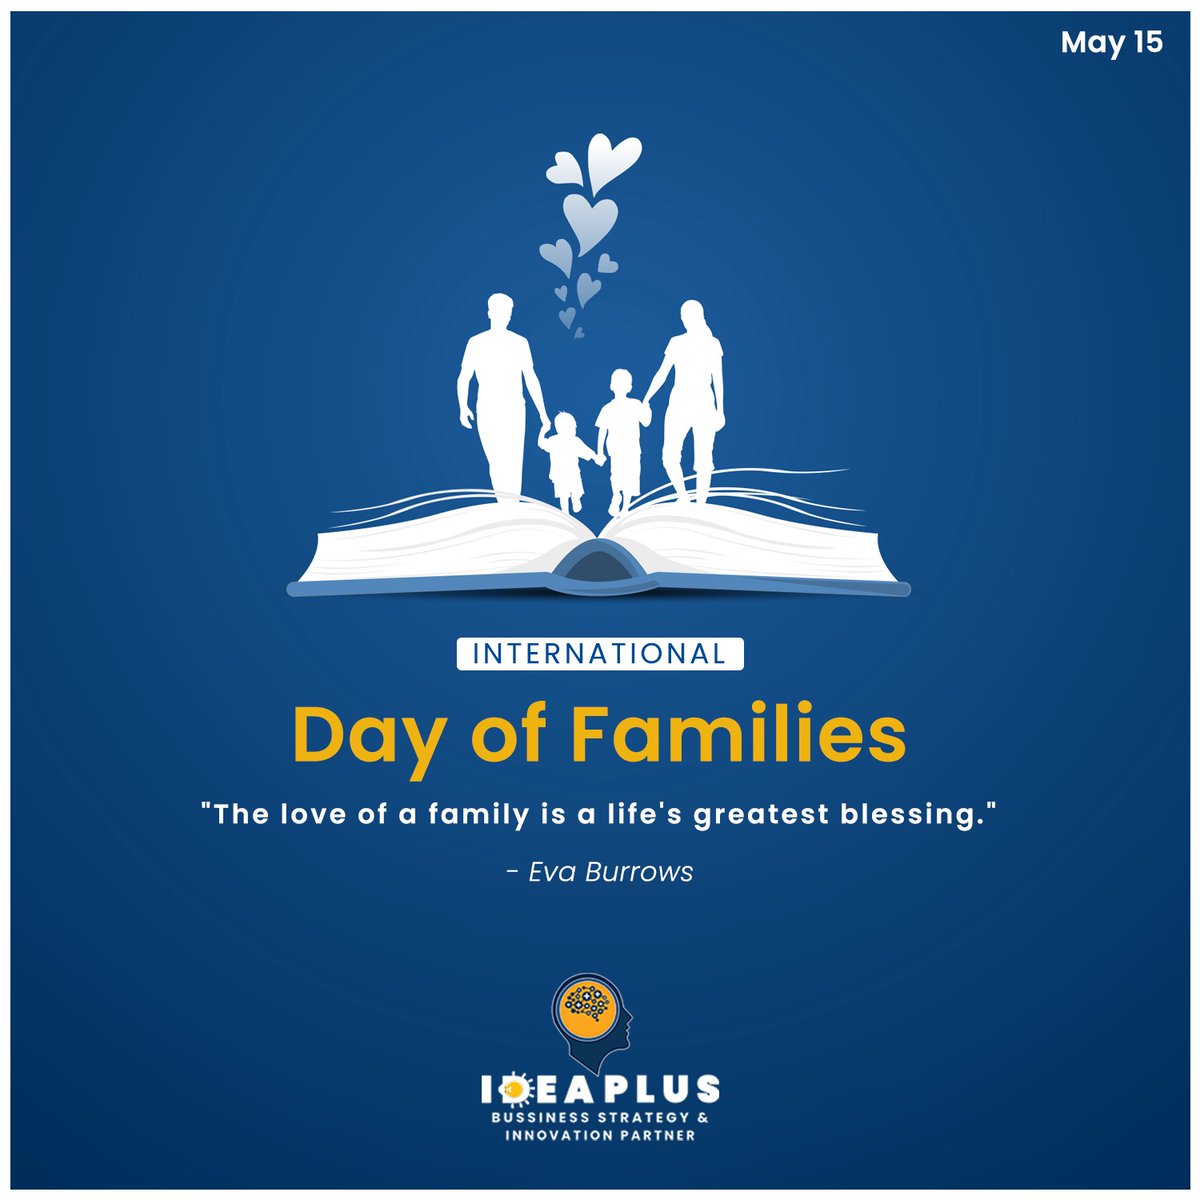 Happy Family Day..❤👨‍👩‍👧‍👦

Idea Plus
HR and Business Solutions
Chennai.
For branding - 9489689584

#15May #சர்வதேசகுடும்பதினம் #happyfamilyday #InternationalFamilyDay #happyfamilytime #familygoals #family #familyfun #ideaplus #business #BusinessSolutions #businessconsulting